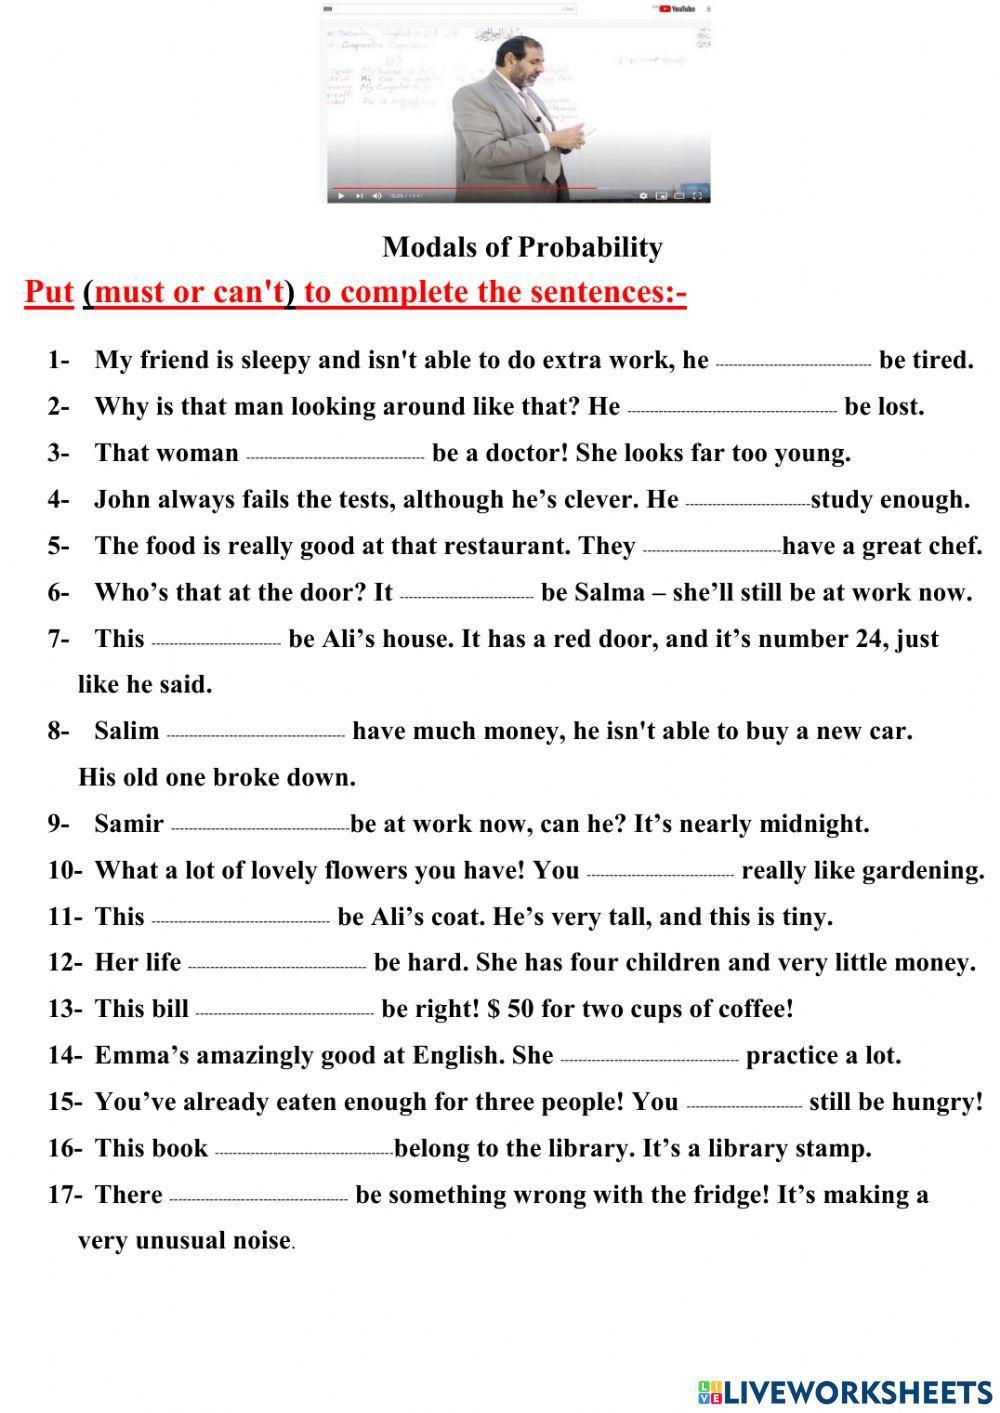 Modals of Probability.